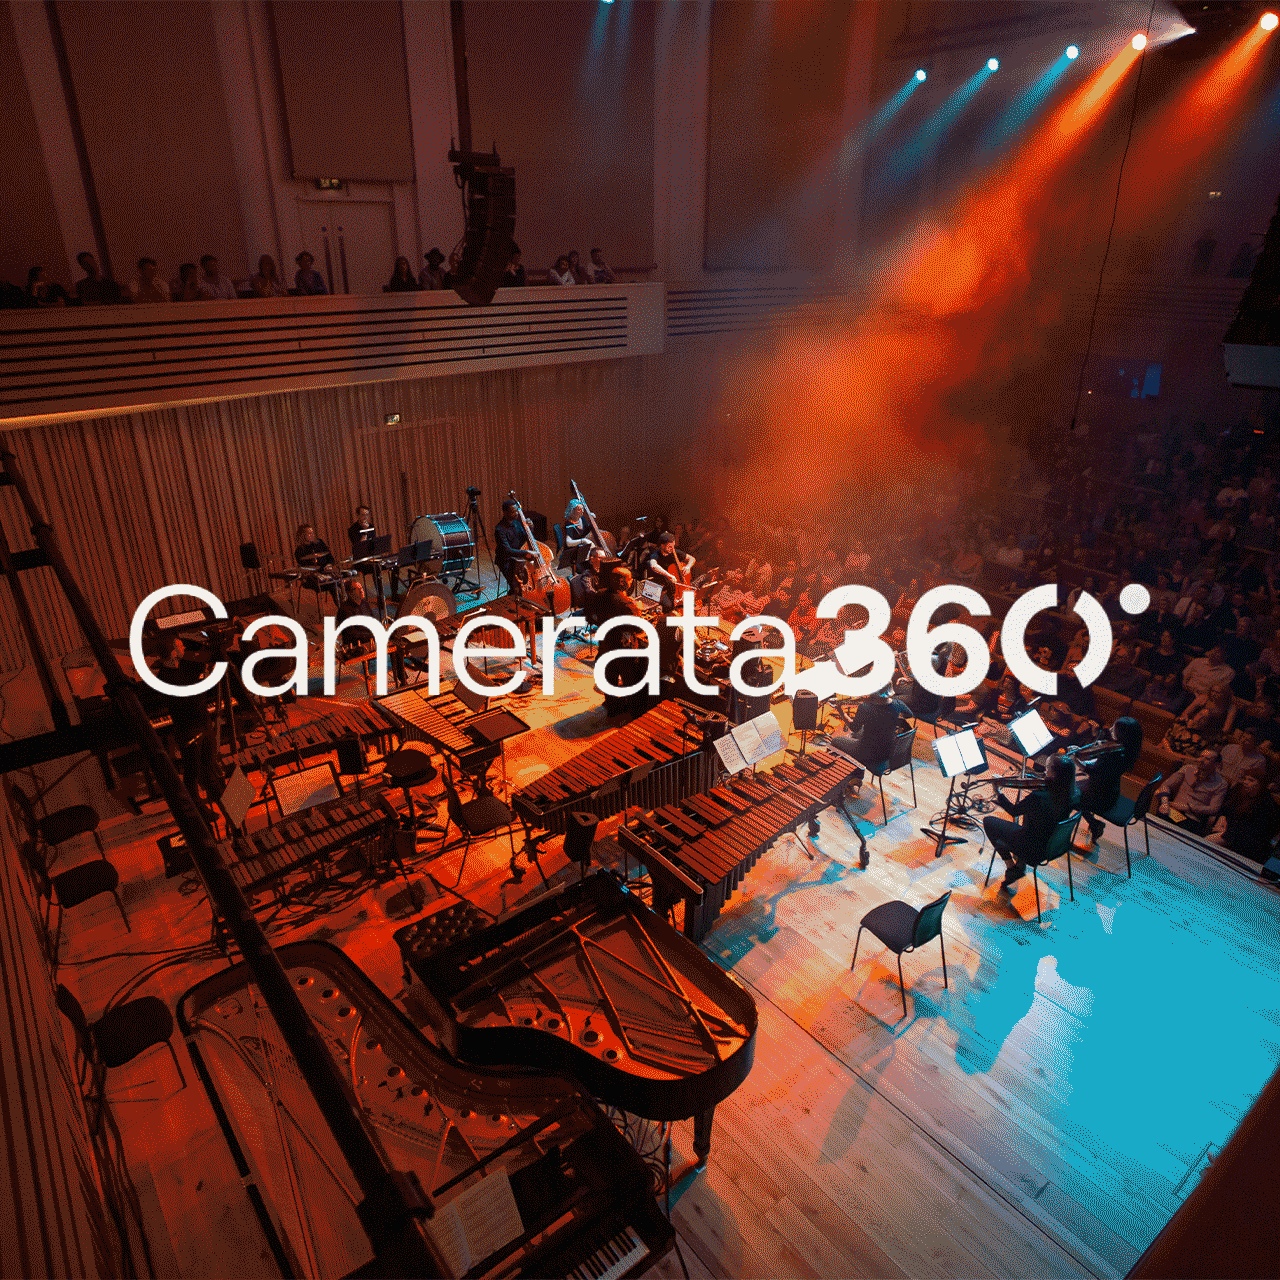 Created with the generous support of The Ruth Sutton Trust for Music, Camerata 360° gives musicians experience in all aspects of our work and the impact it makes.